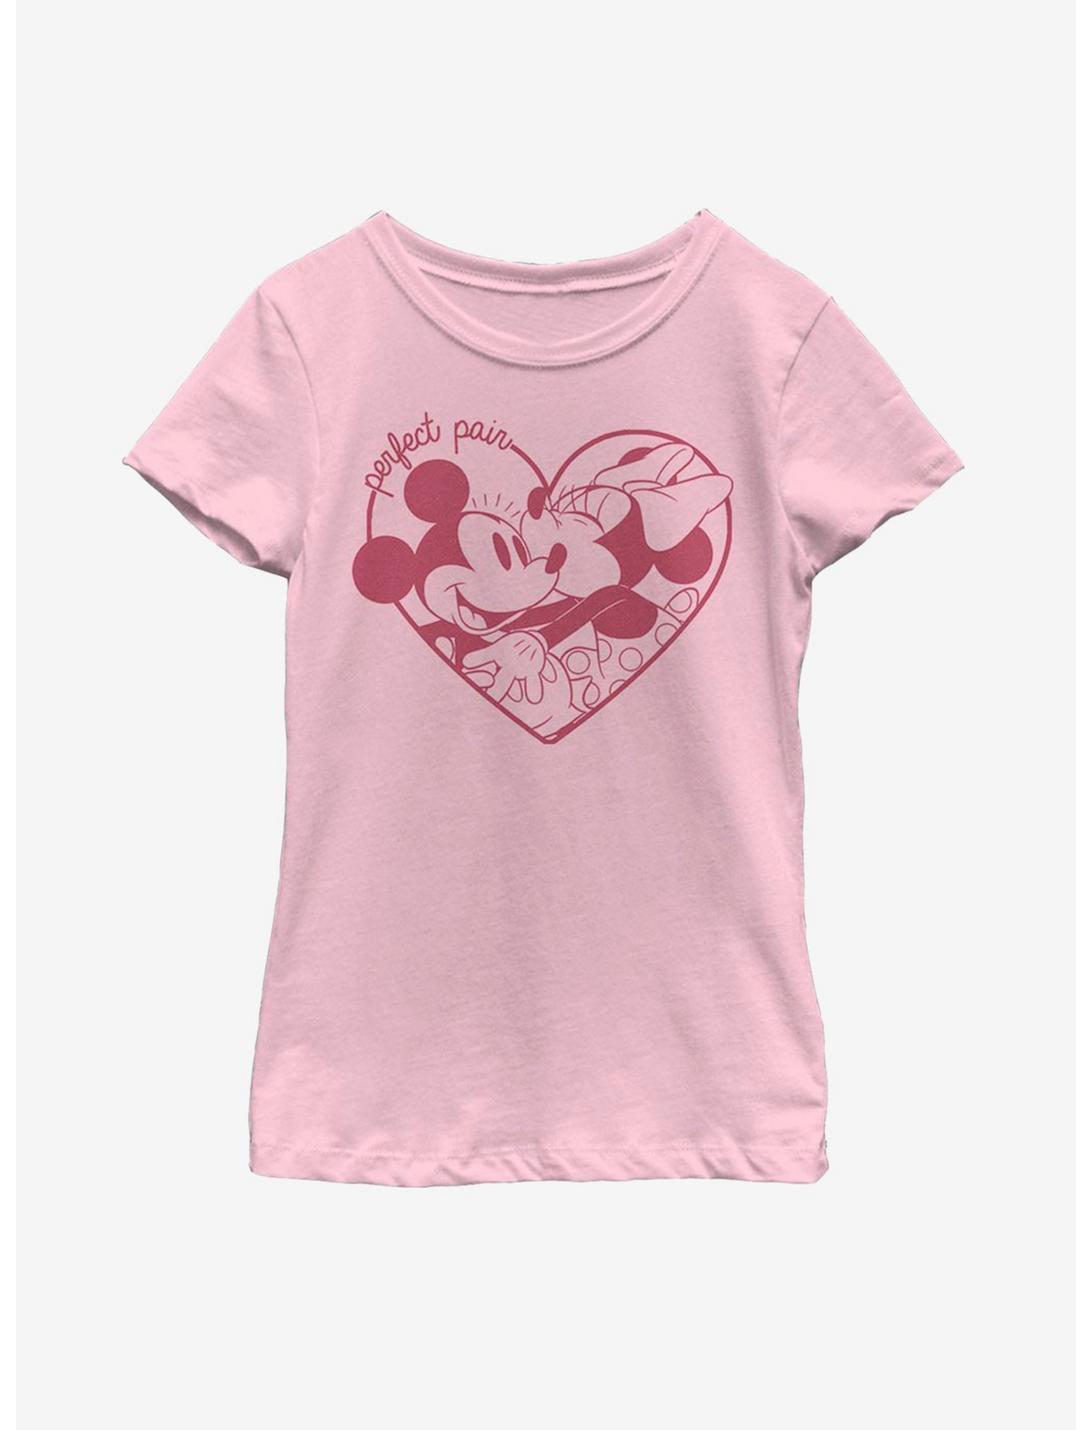 Disney Mickey Mouse Perfect Pair Youth Girls T-Shirt, PINK, hi-res